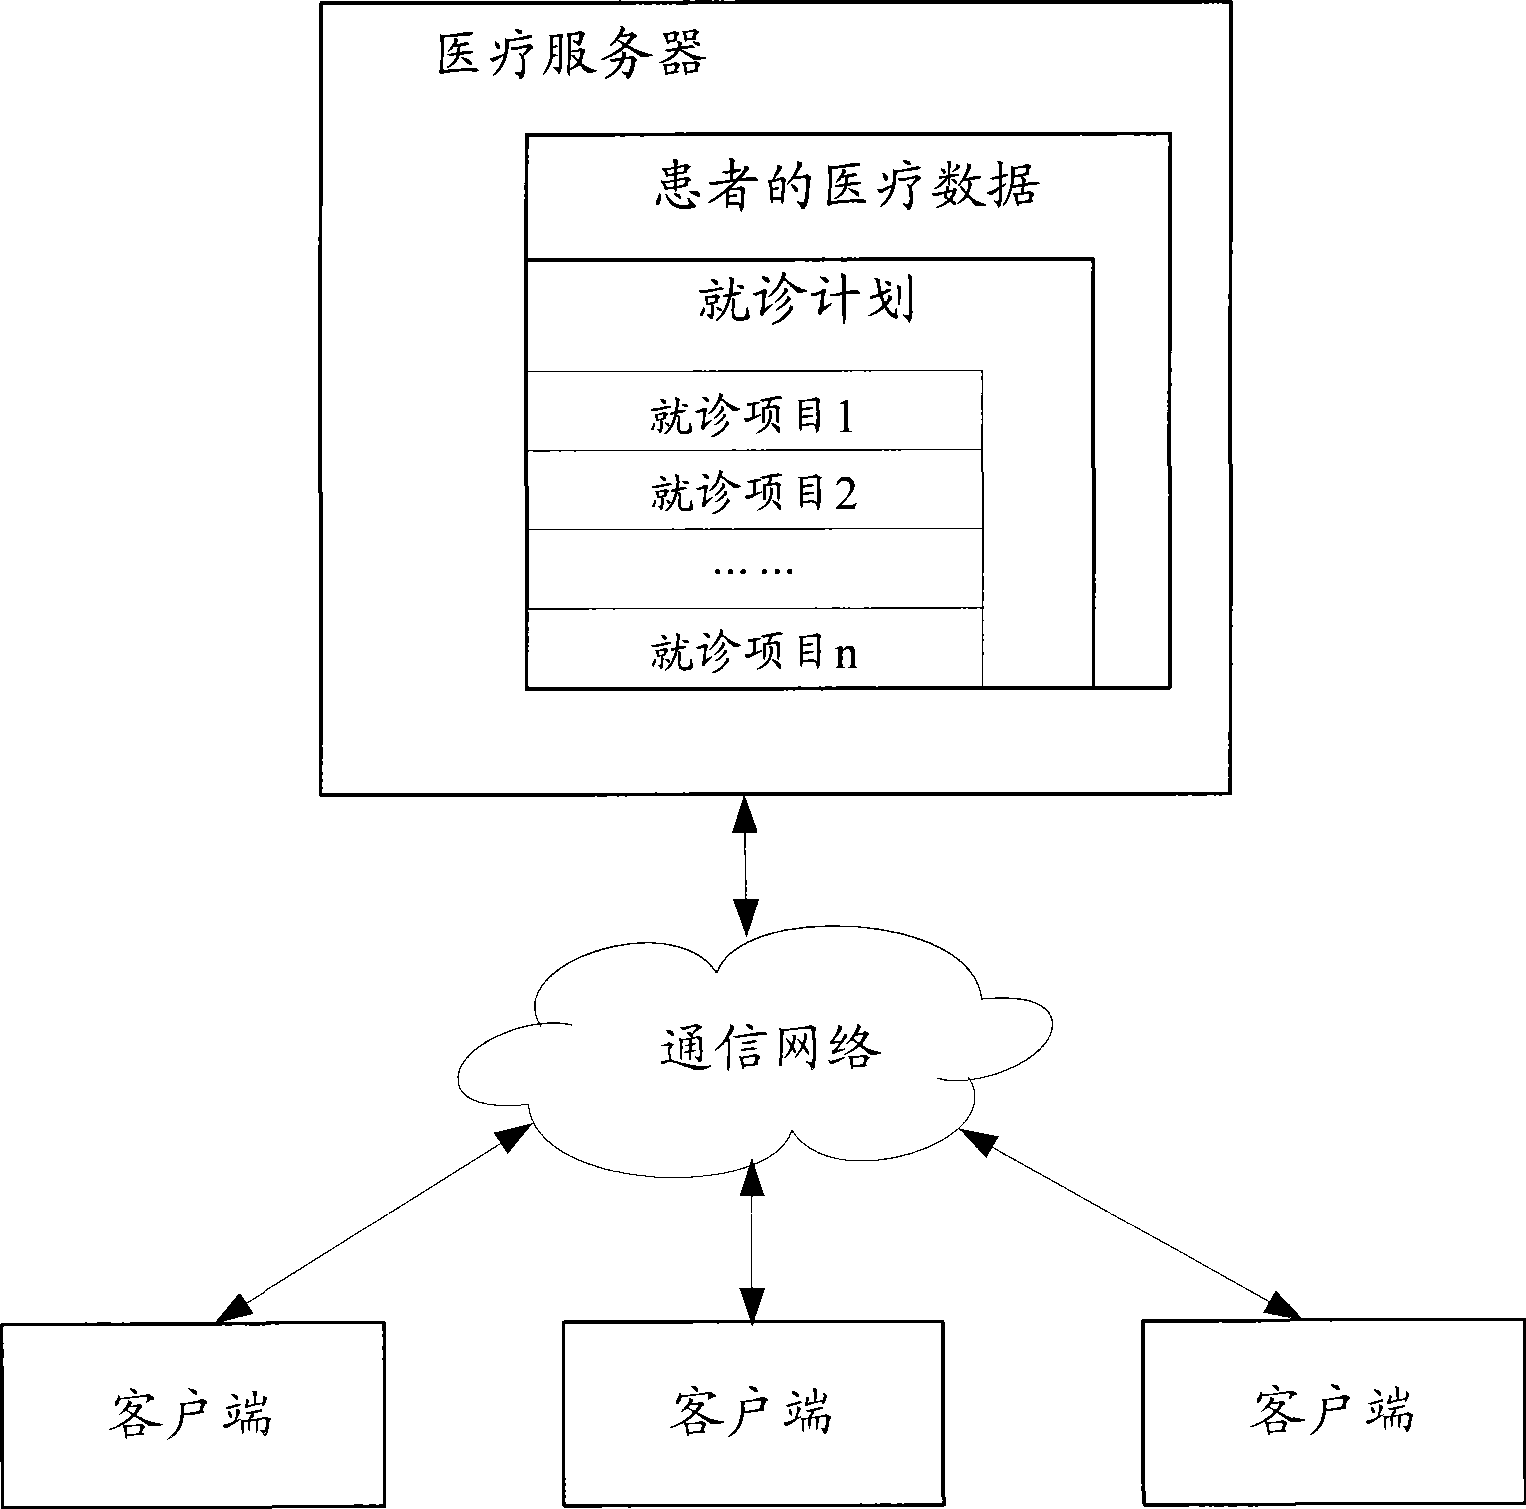 Medical data transmission processing system and method thereof